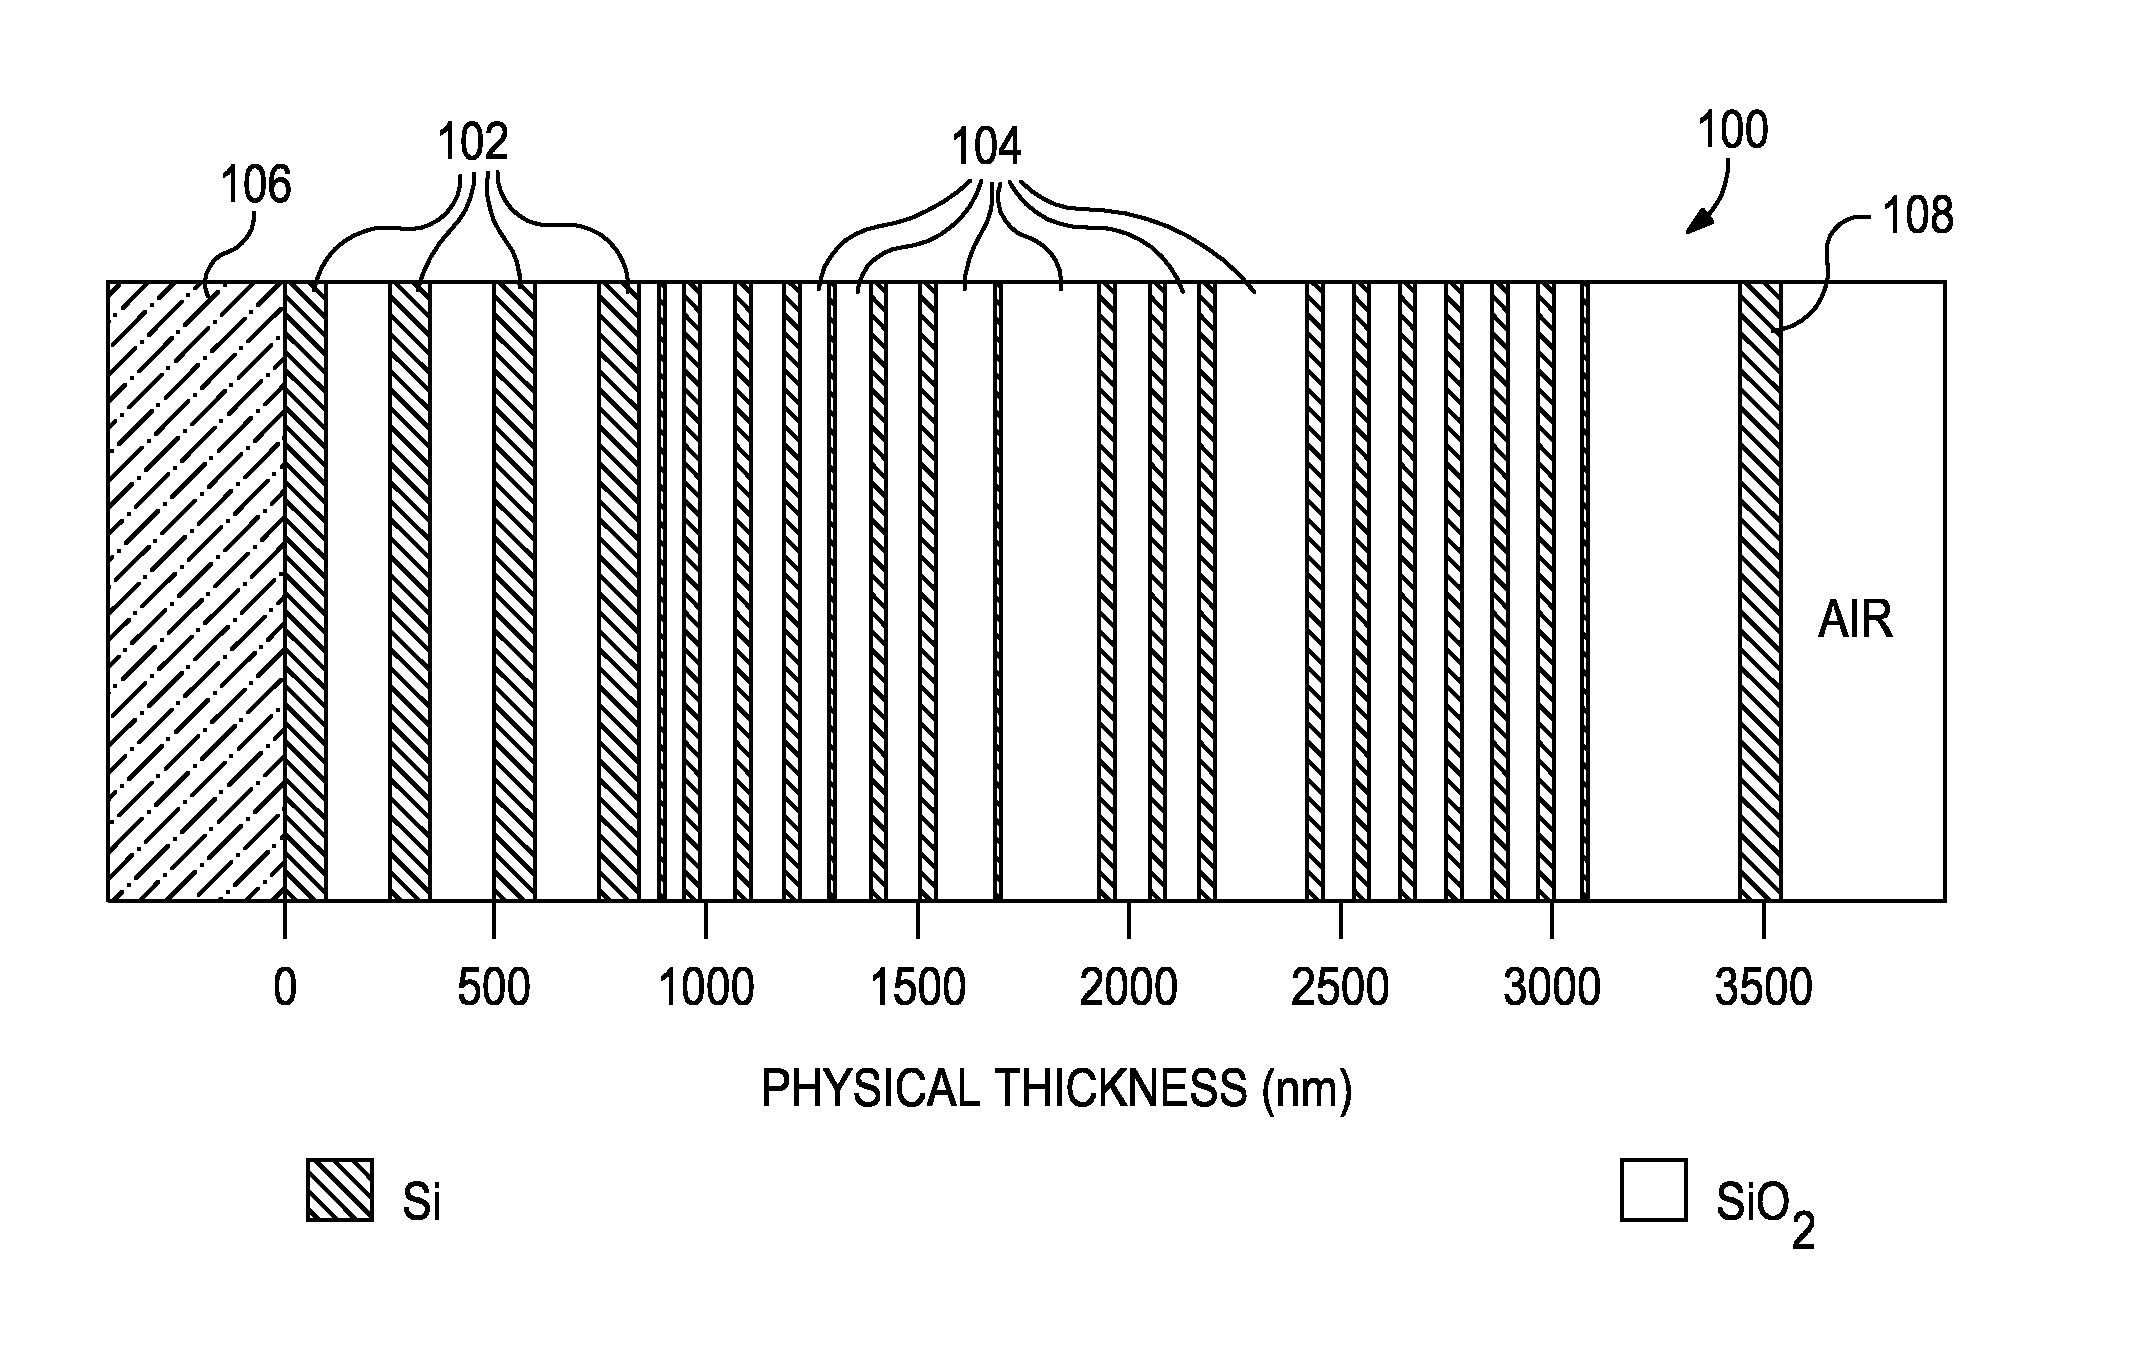 Imaging Systems for Optical Computing Devices